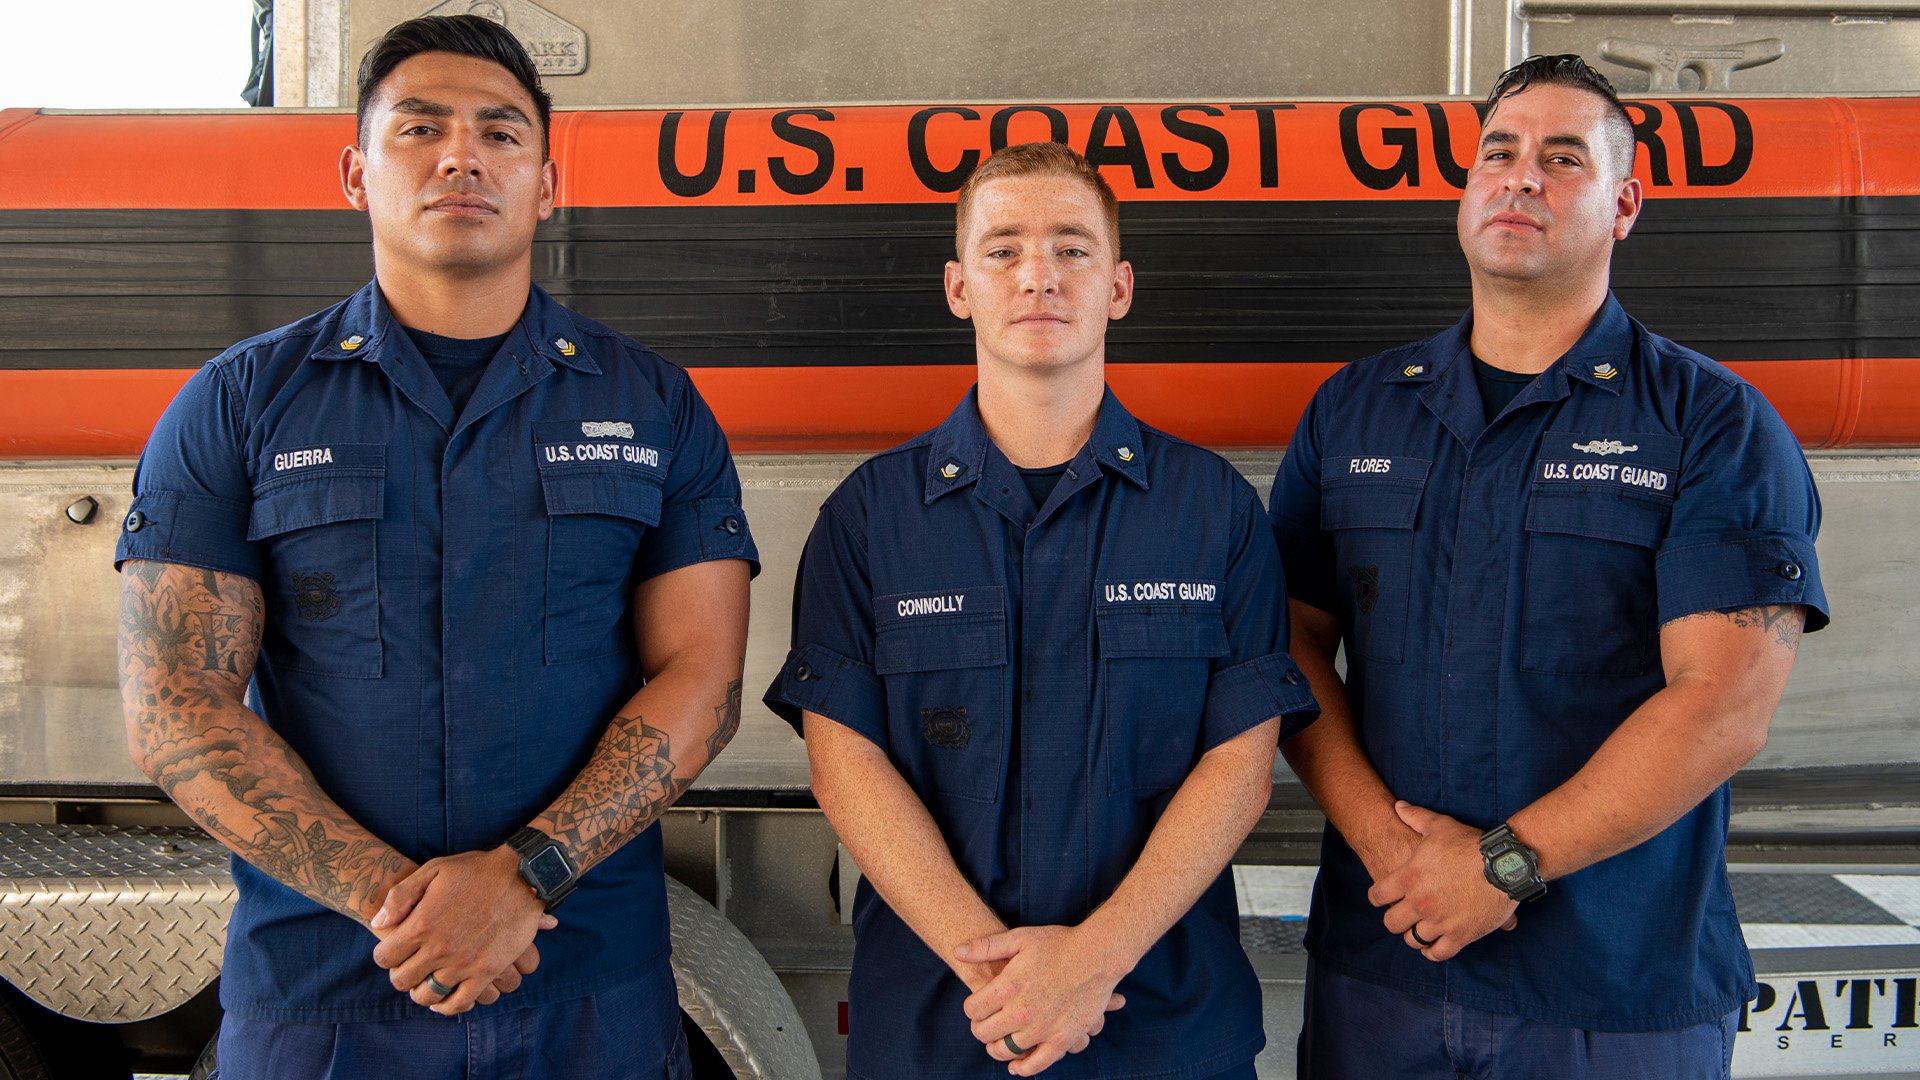 US Coast Guard Coast Guard Maritime Safety and Security Team Houston's Boatswain's Mate 2nd Class Jarrett Guerra, Boatswain's Mate 3rd Class Corey Connolly, and Maritime Enforcement Specialist 2nd Class Jake Flores are credited with saving a 1-year-old boy from drowning on the Rio Grande River in the toe of Texas on June 2, 2022. US Coast Guard photo by Public Affairs Specialist 1st Class Corinne Zilnicki.